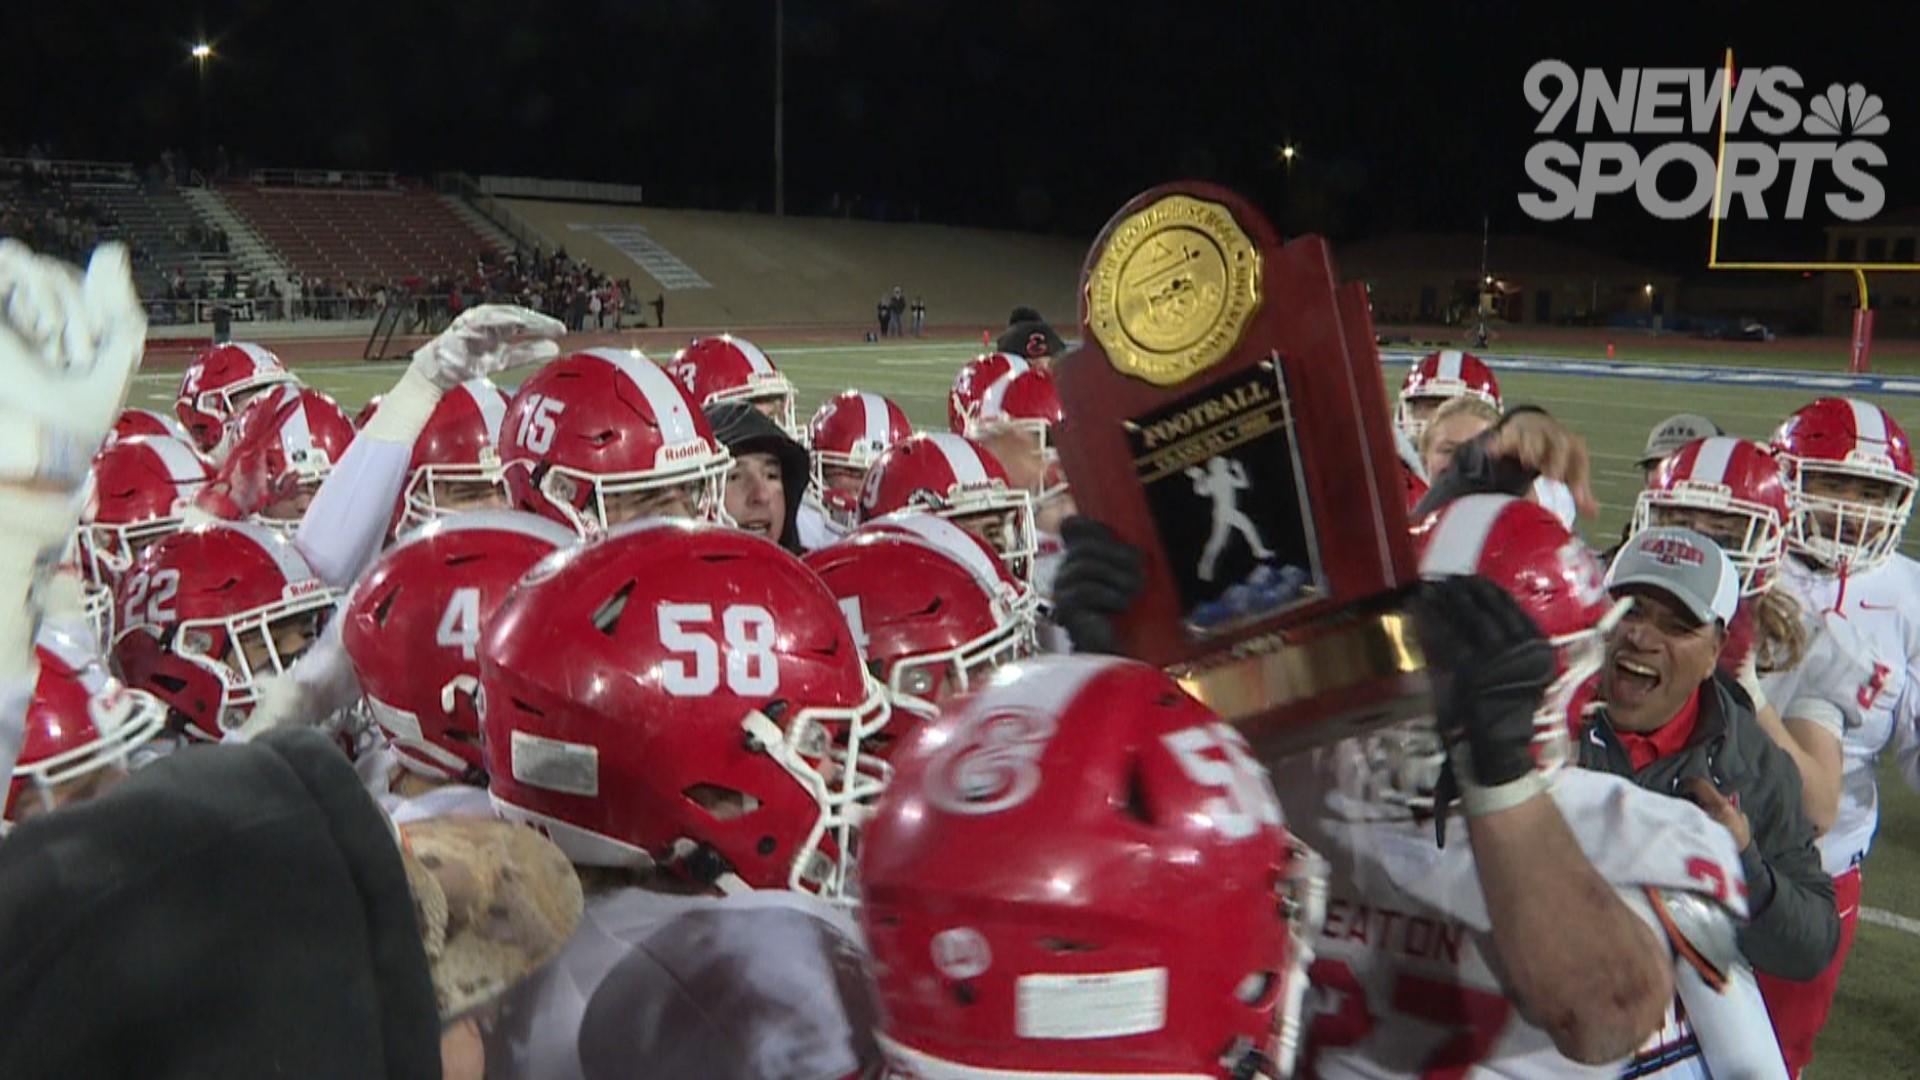 The Reds defeated Delta 21-10 in the Class 2A football title game for their third consecutive state championship.